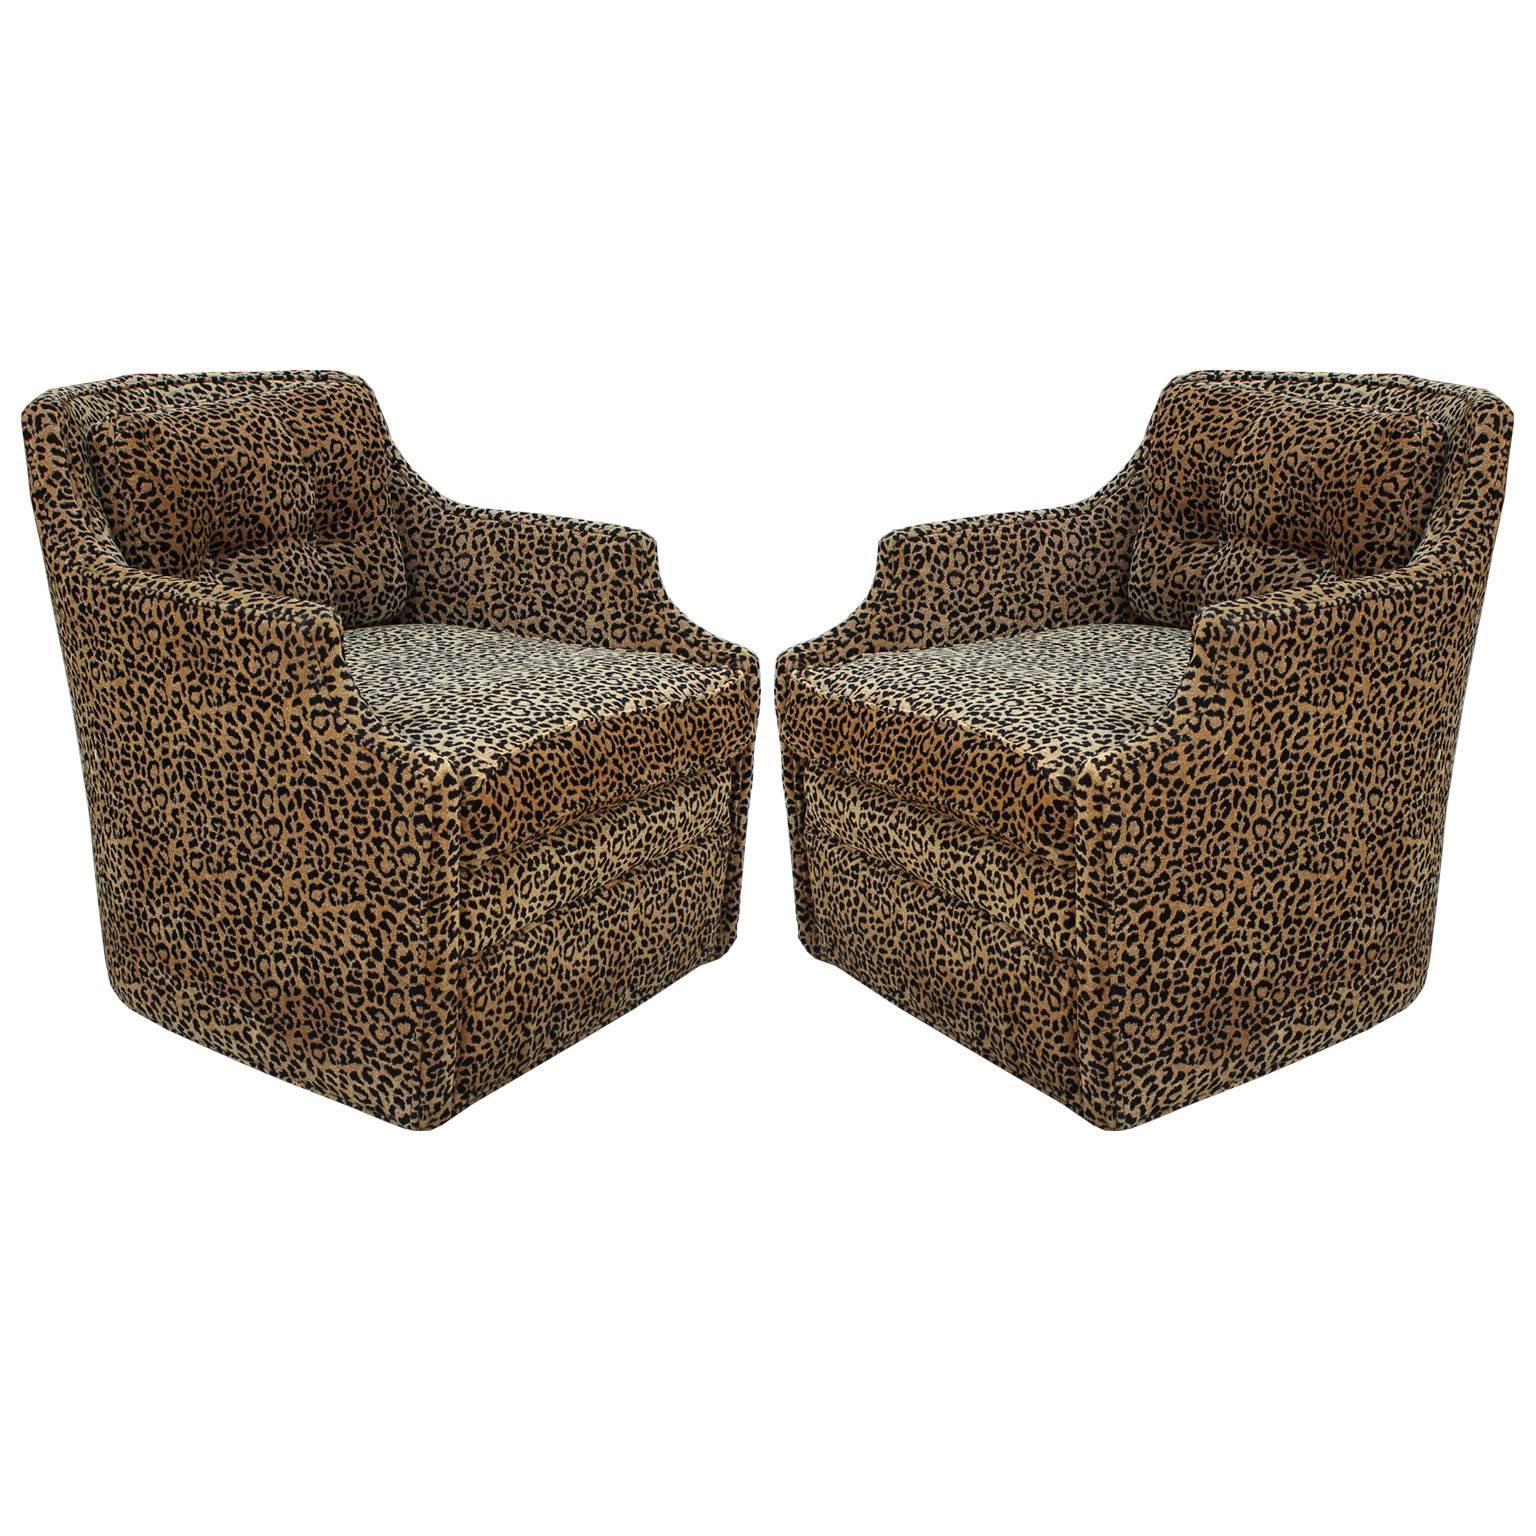 Luxe Pair of Modern Swivel Lounge Chairs in Leopard